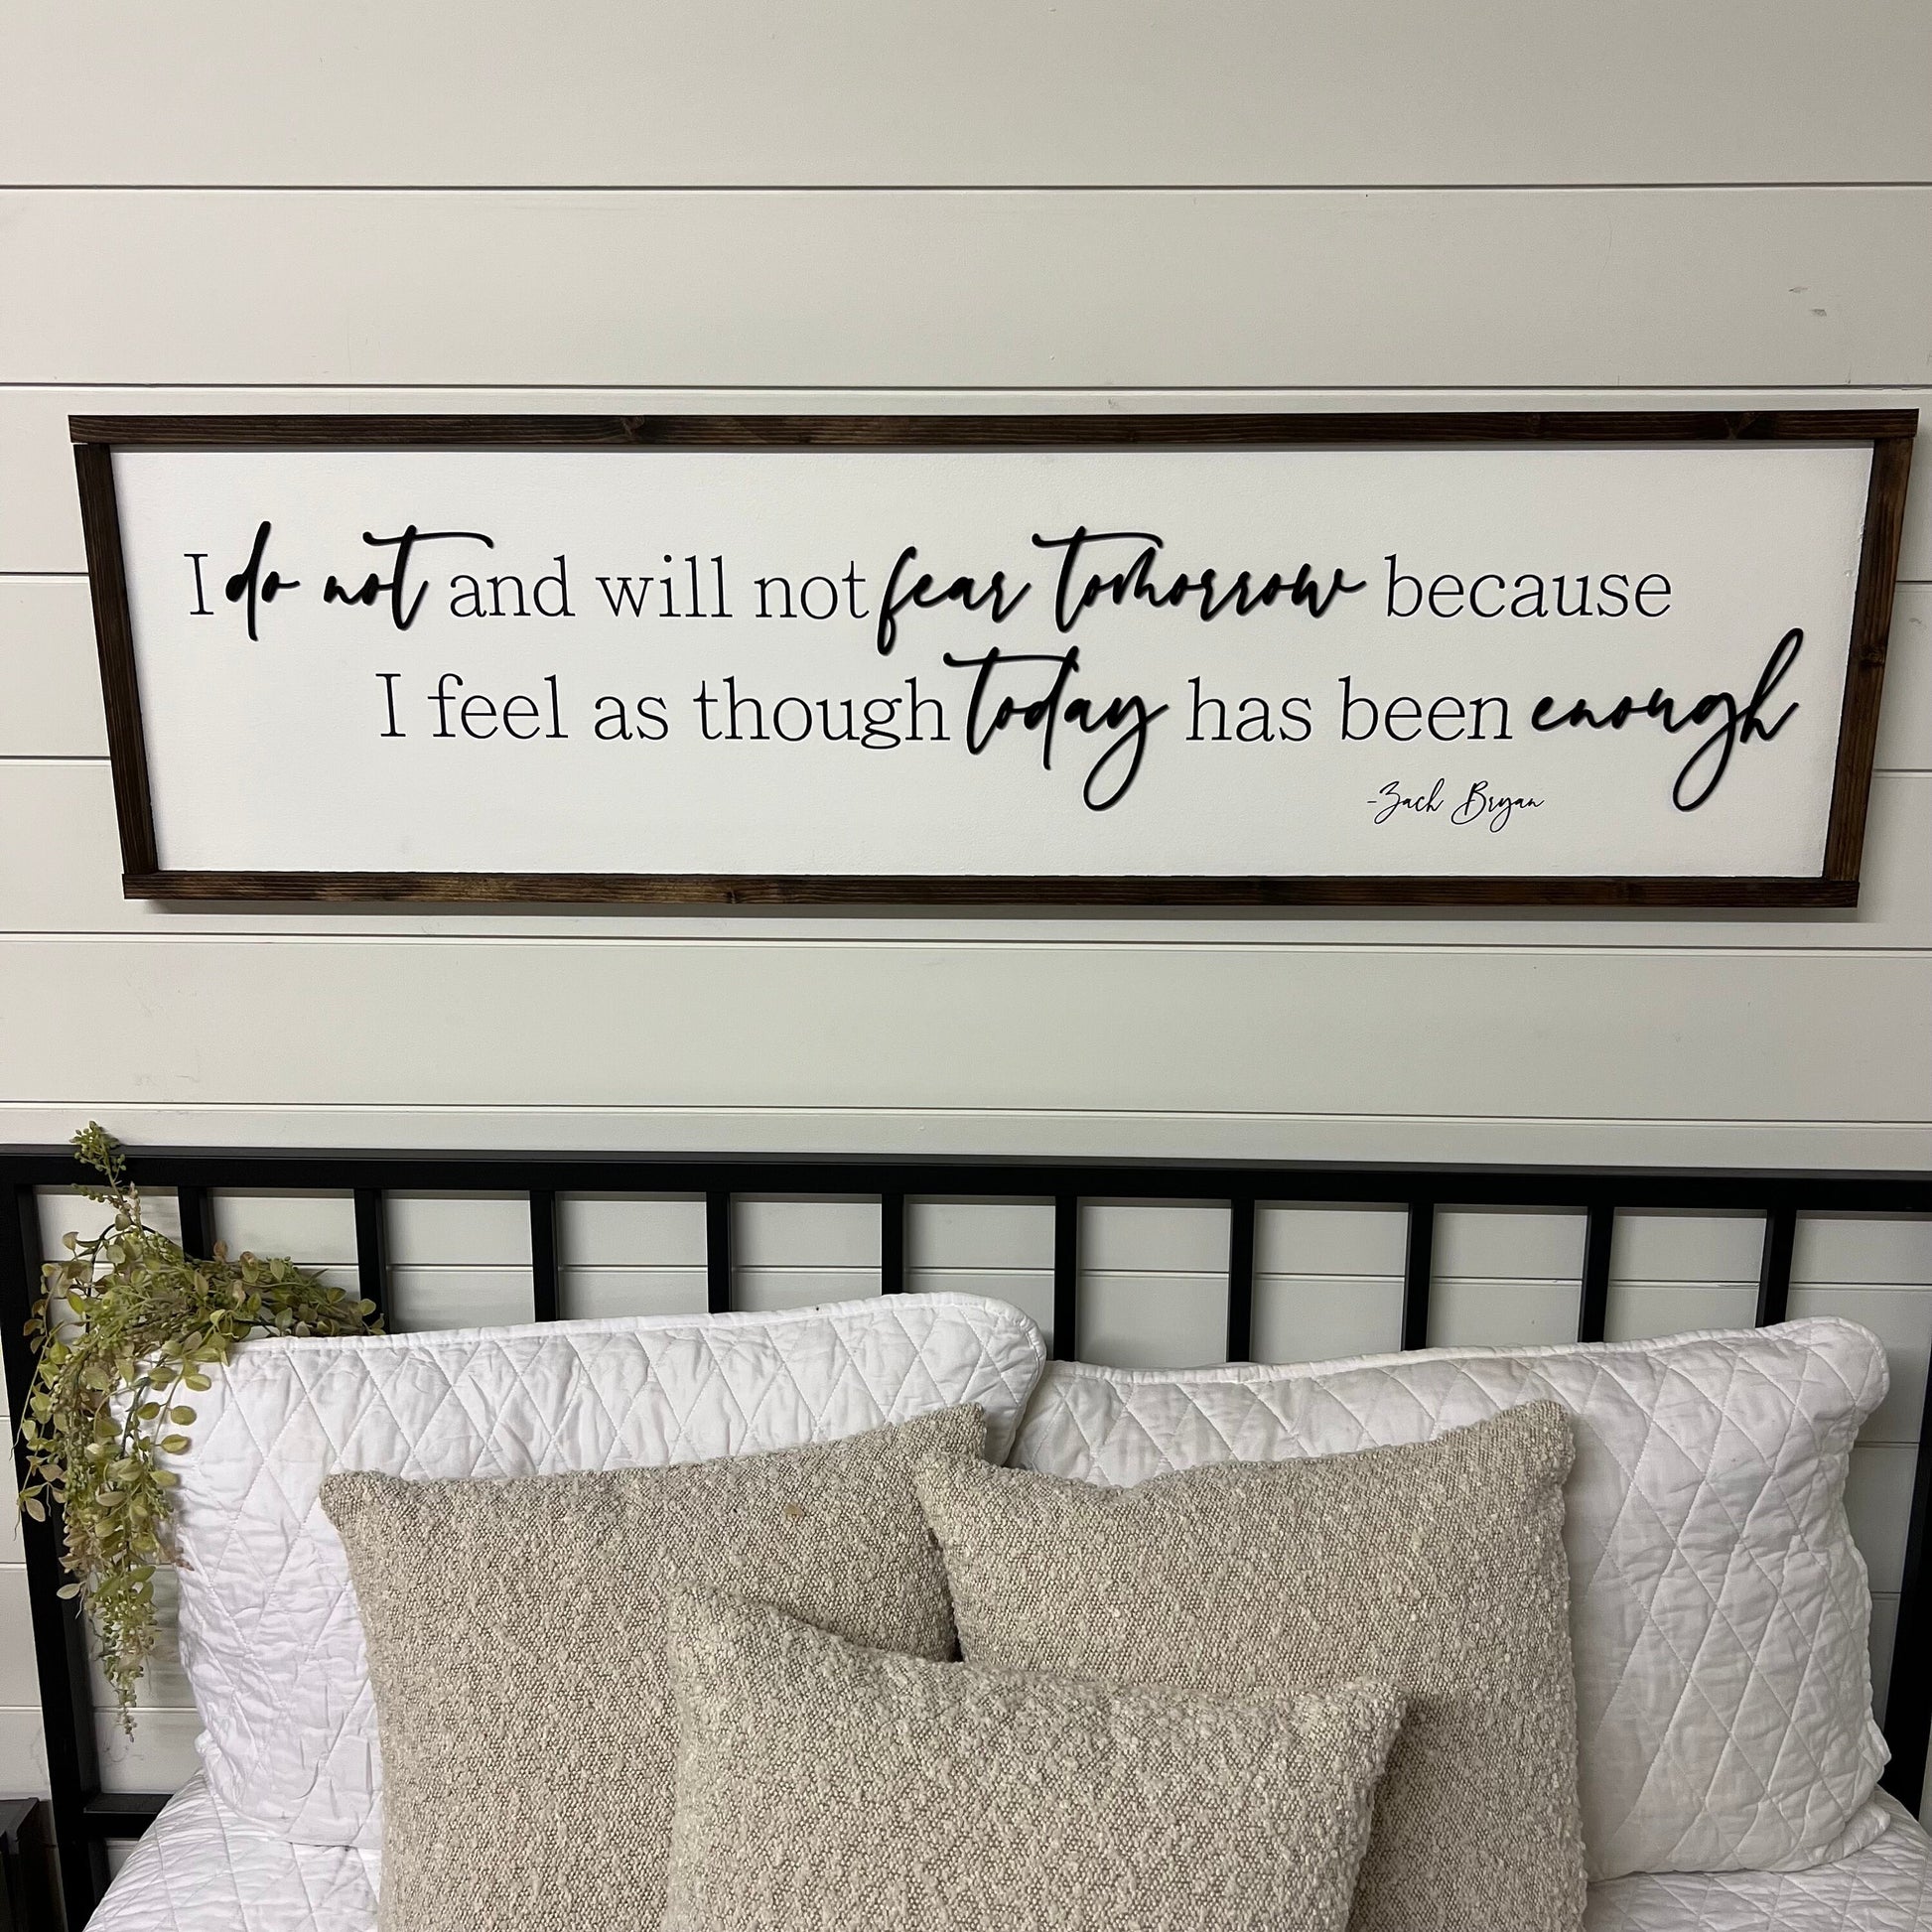 do not and will not fear tomorrow - above over the bed couch sign - zach bryan - master bedroom wall art [FREE SHIPPING!]